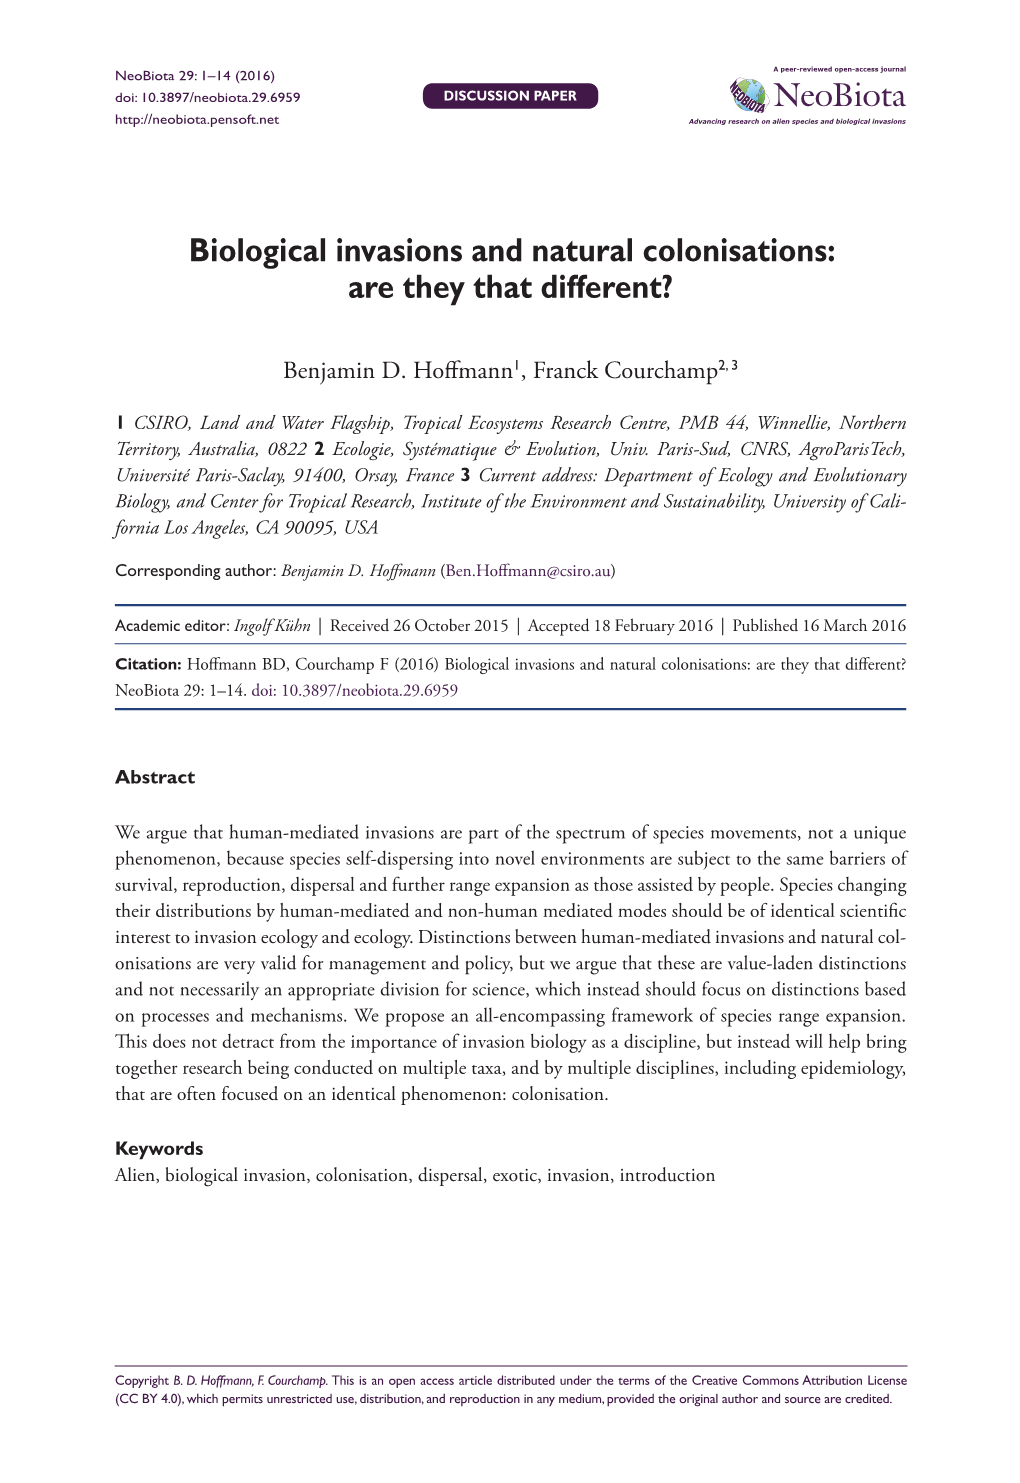 Biological Invasions and Natural Colonisations